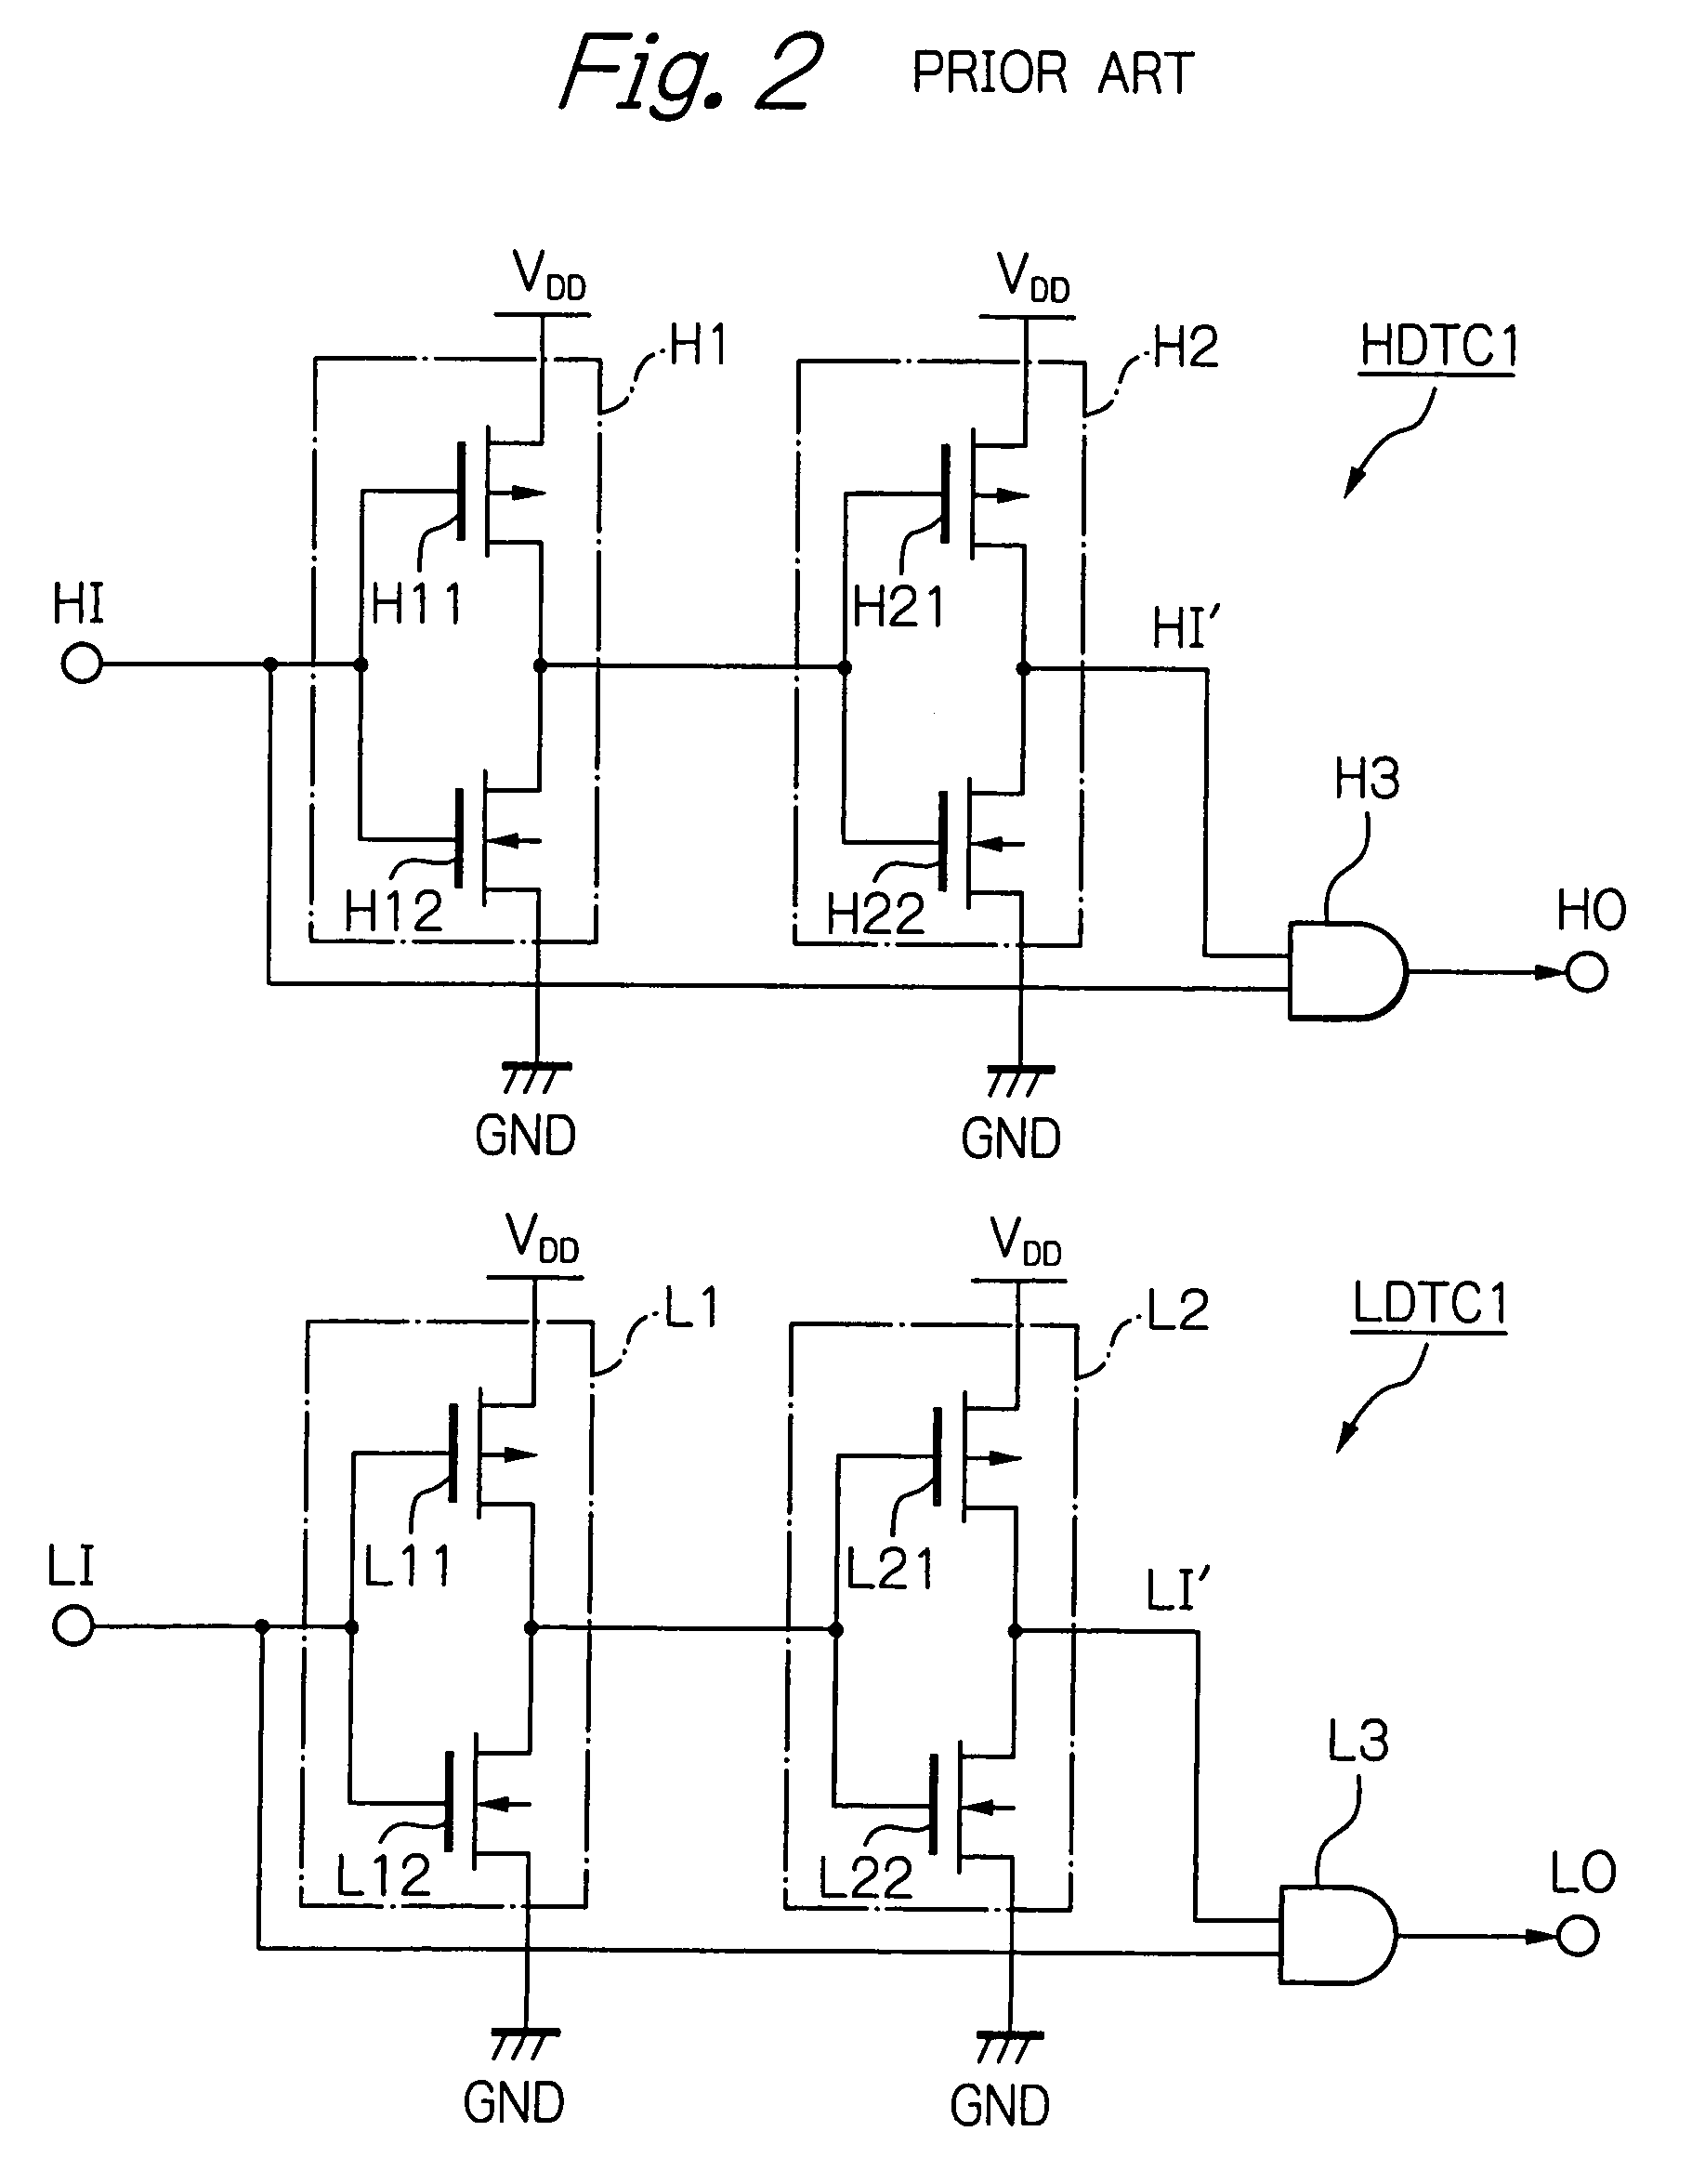 Dead time control circuit capable of adjusting temperature characteristics of dead time